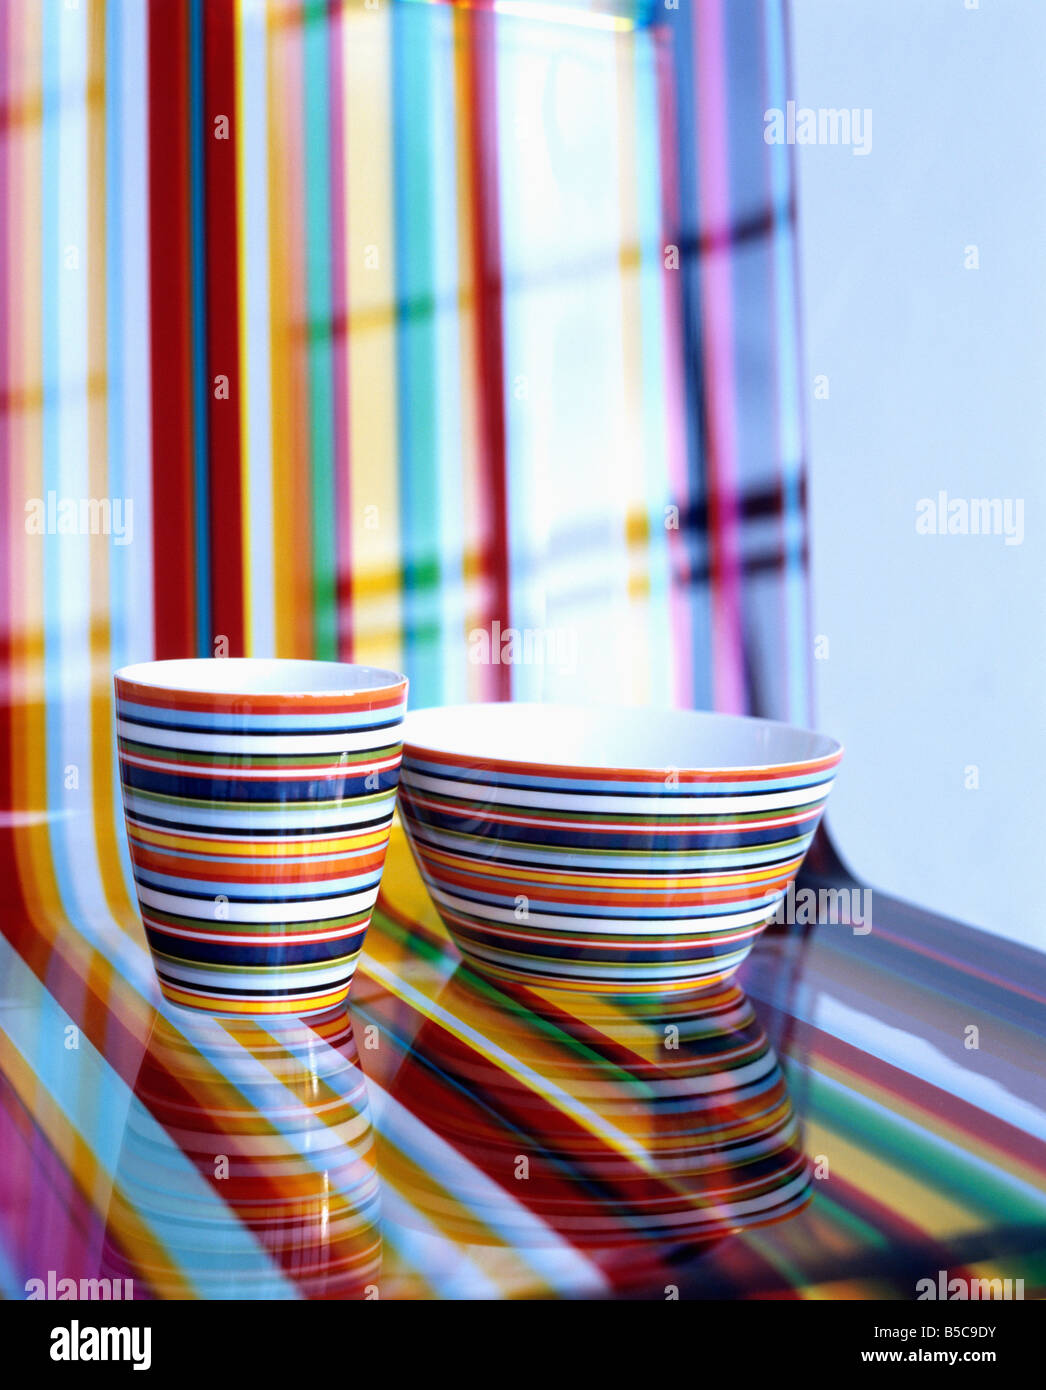 Close-up of multi-coloured striped bowl and cup on matching striped acrylic chair Stock Photo